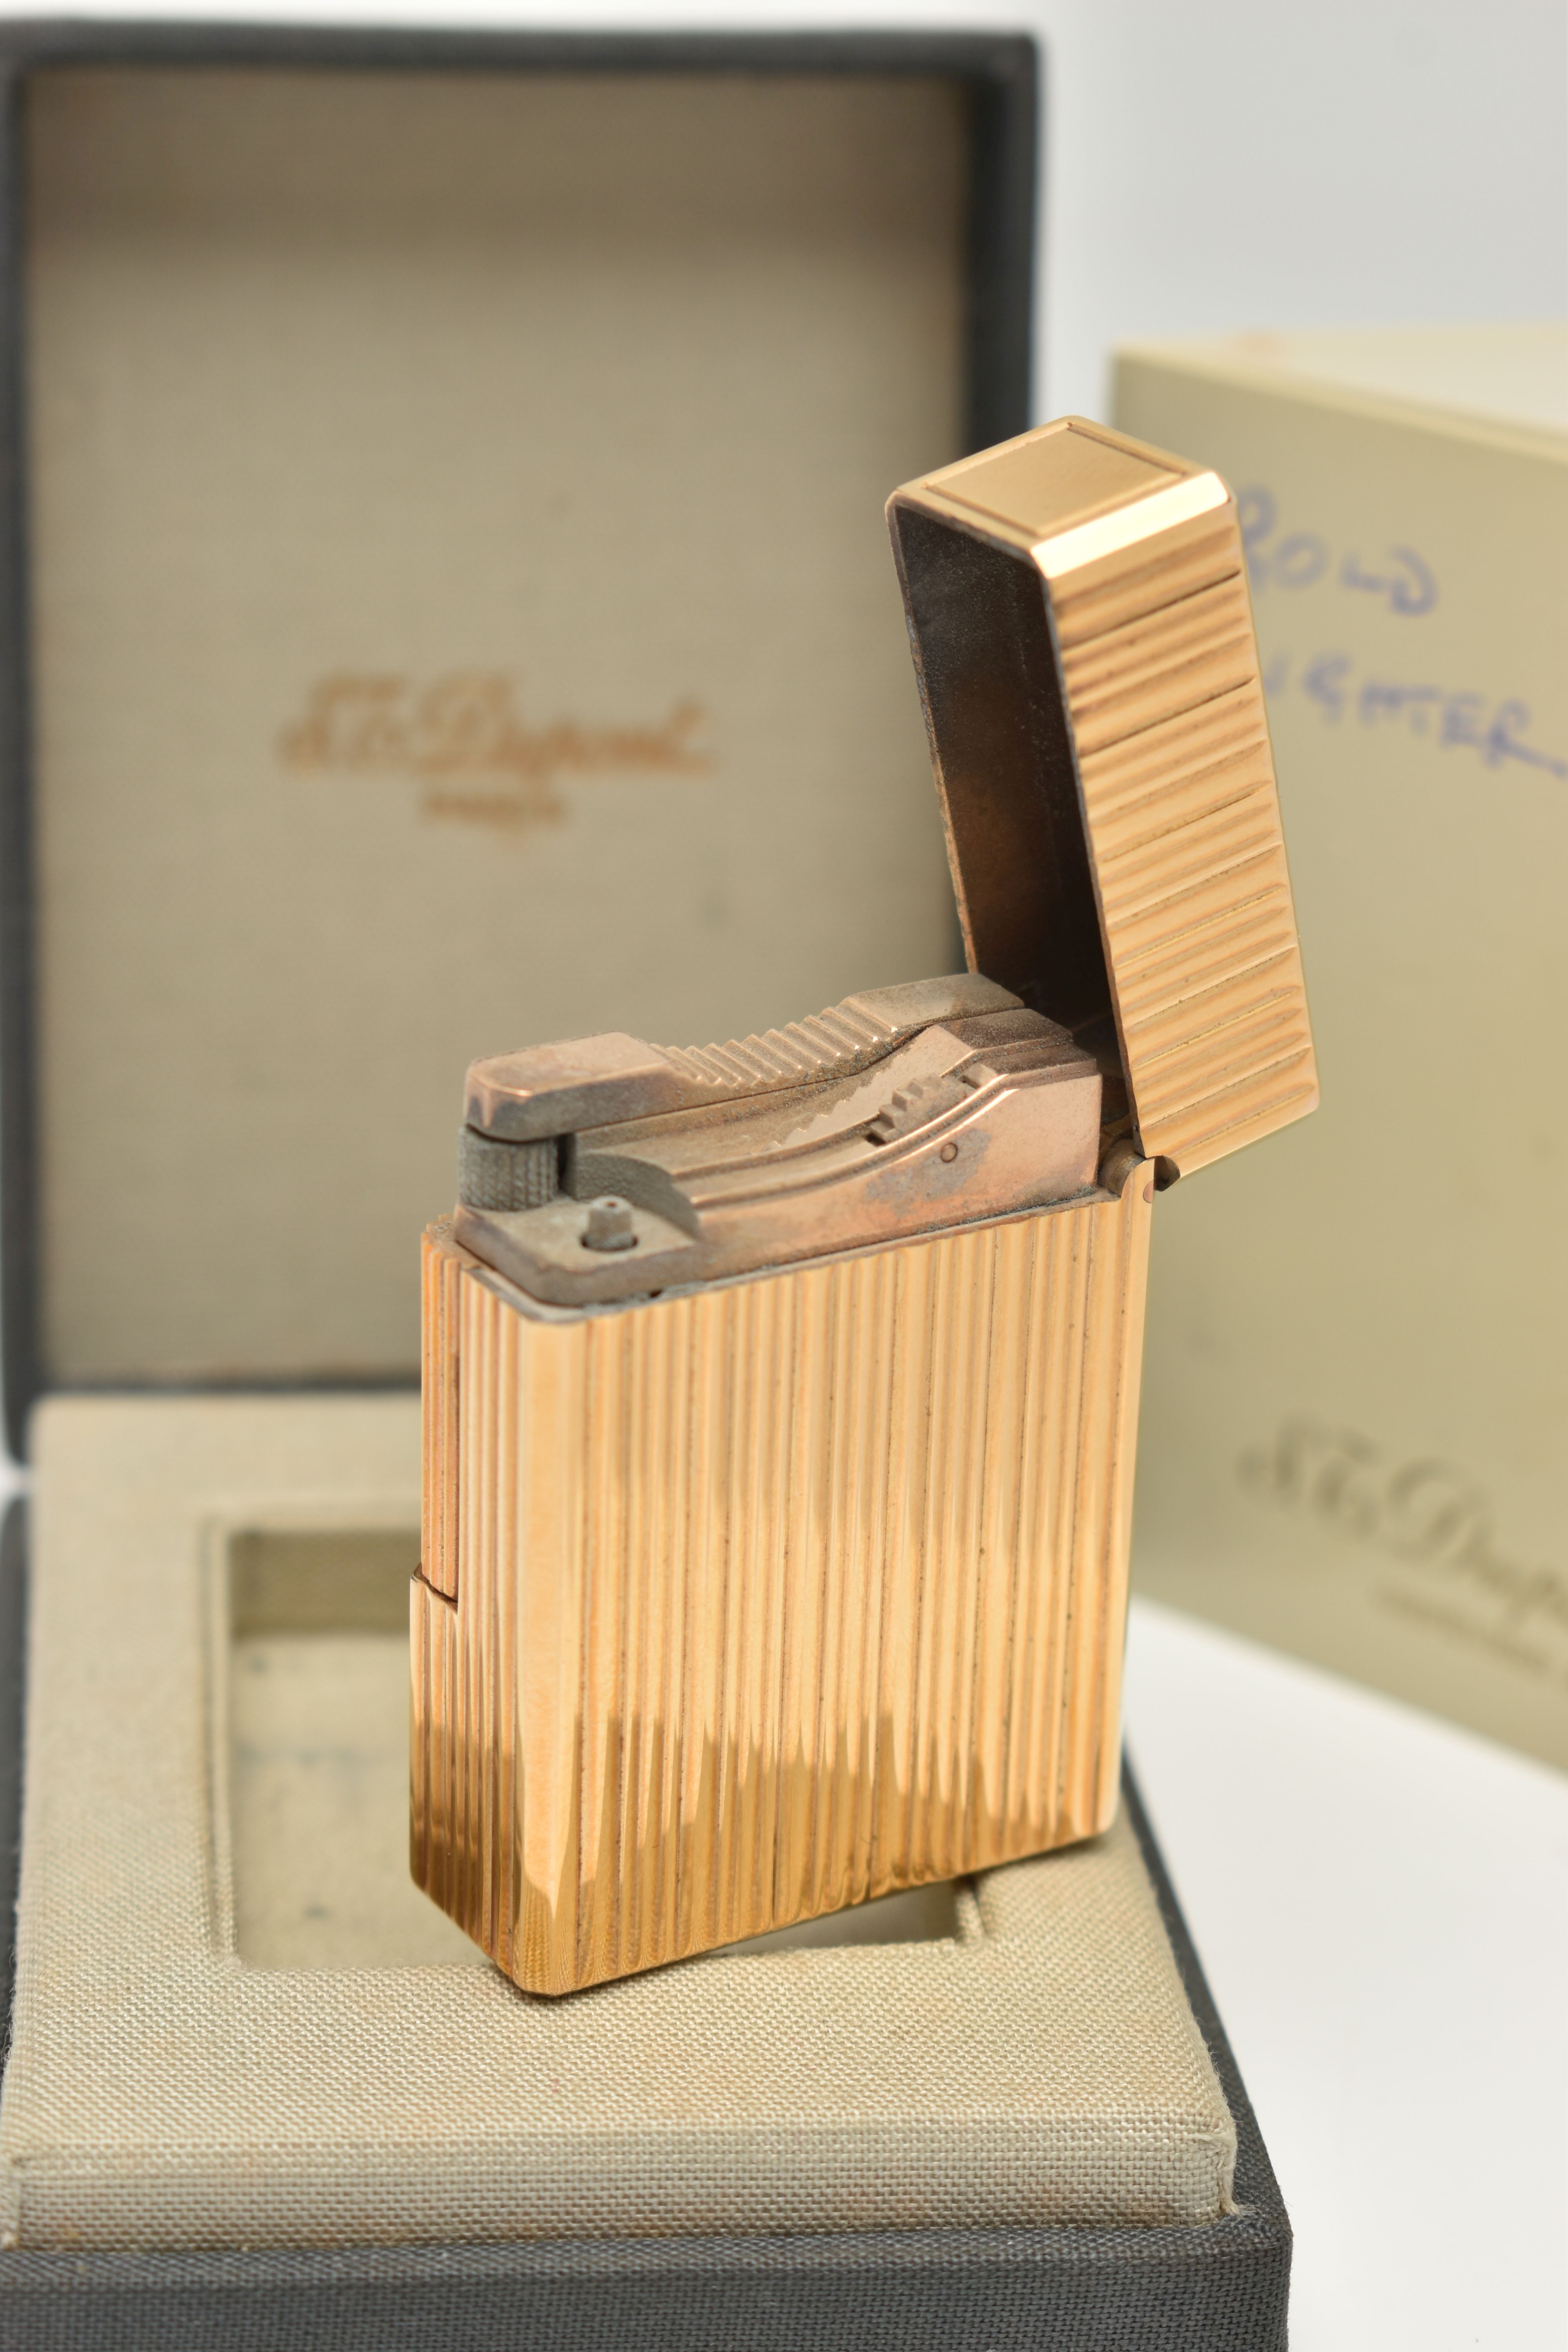 A 'S.J.DUPONT' LIGHTER, a signed gold plated lighter, encased in a signed box also including an - Image 2 of 3